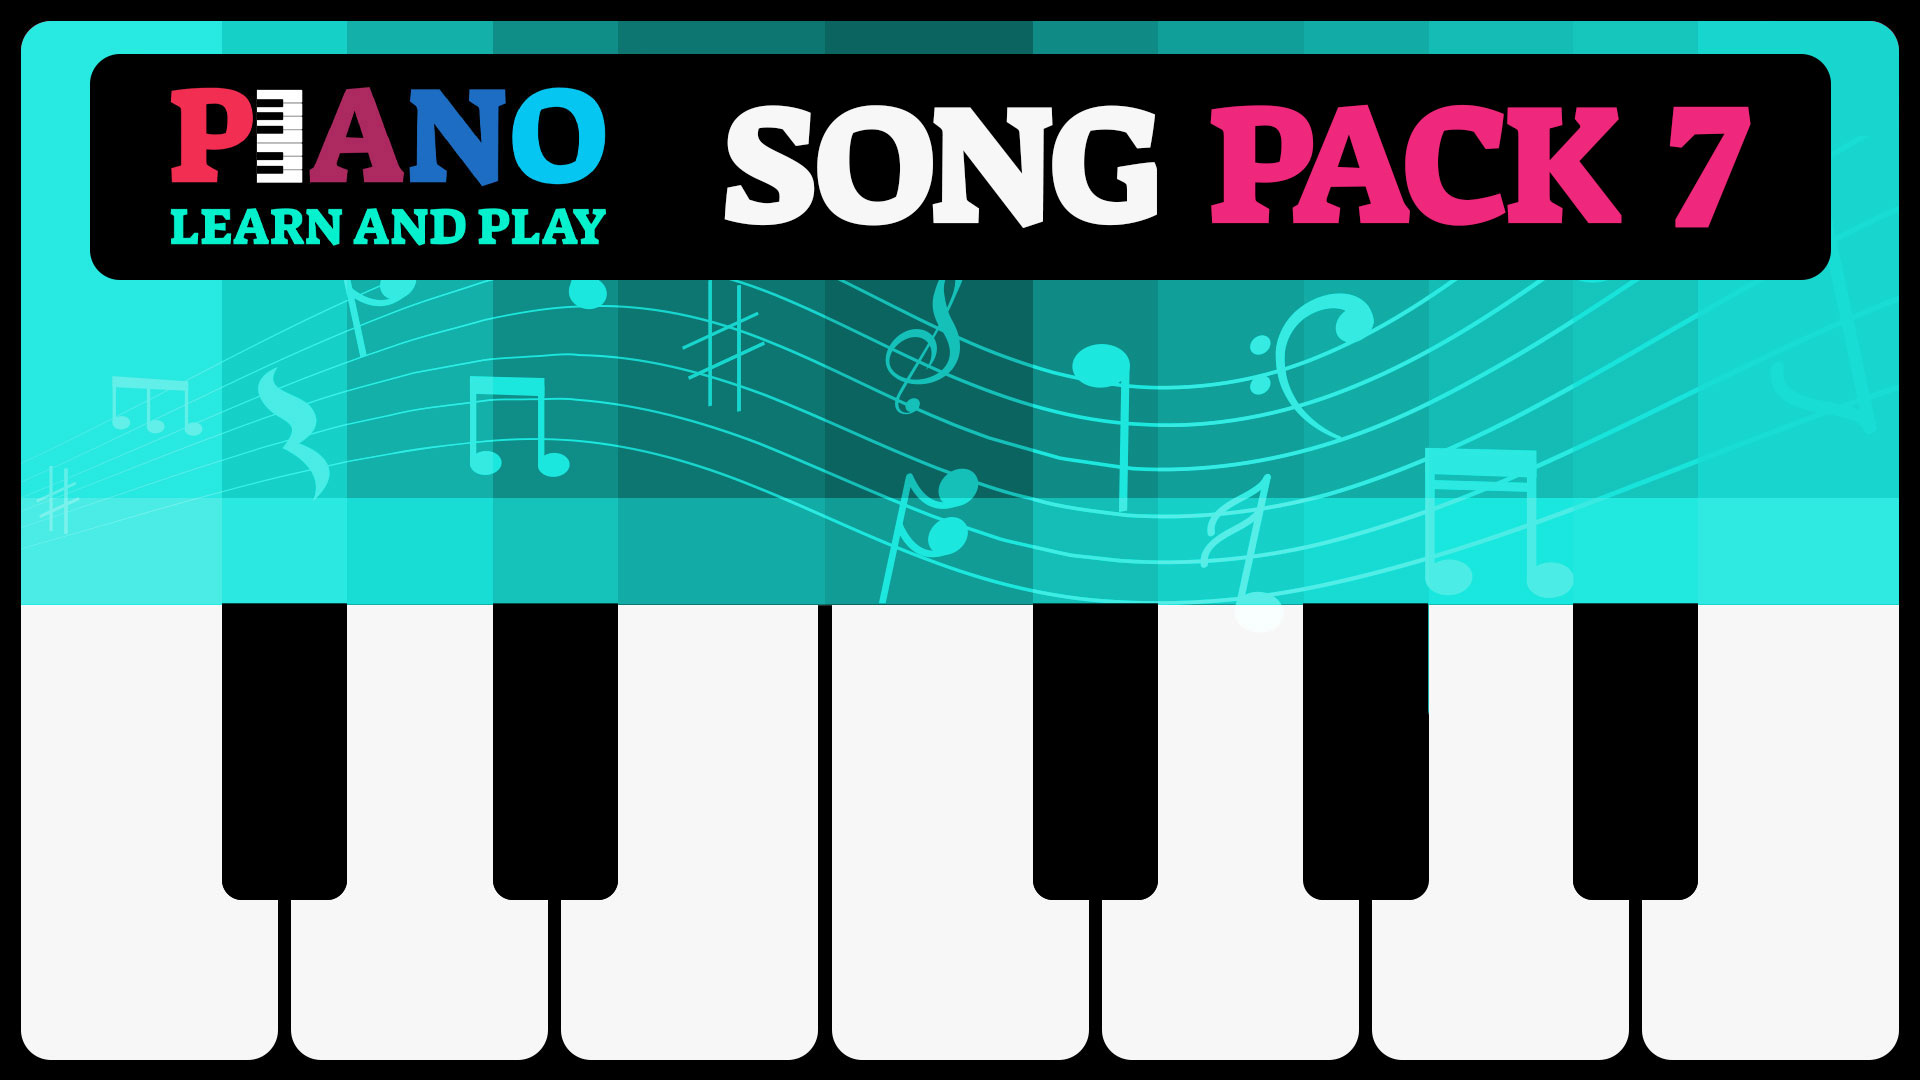 Song Pack 7